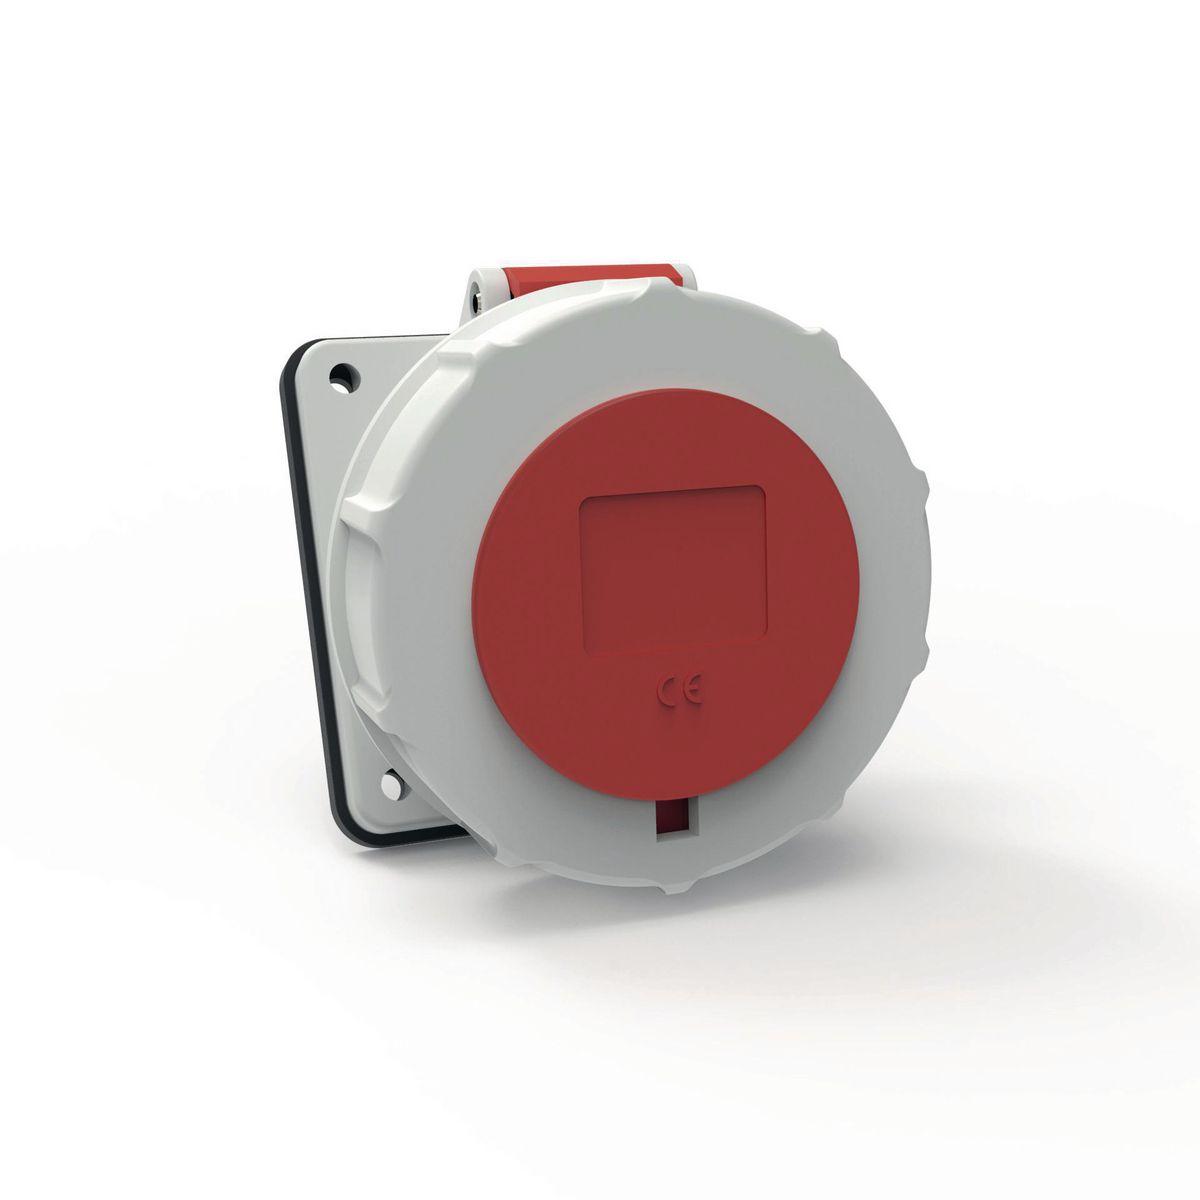 Hubbell C420R7WA Heavy Duty Products, IEC Pin and Sleeve Devices, Hubbell-PRO, Female, Receptacle, 20 A 3 Phase 480 VAC, 3-POLE 4-WIRE, Red, Watertight  ; IP67 environmental ratings ; Impact and corrosion resistant insulated non-metallic housing ; Sequential contact engag